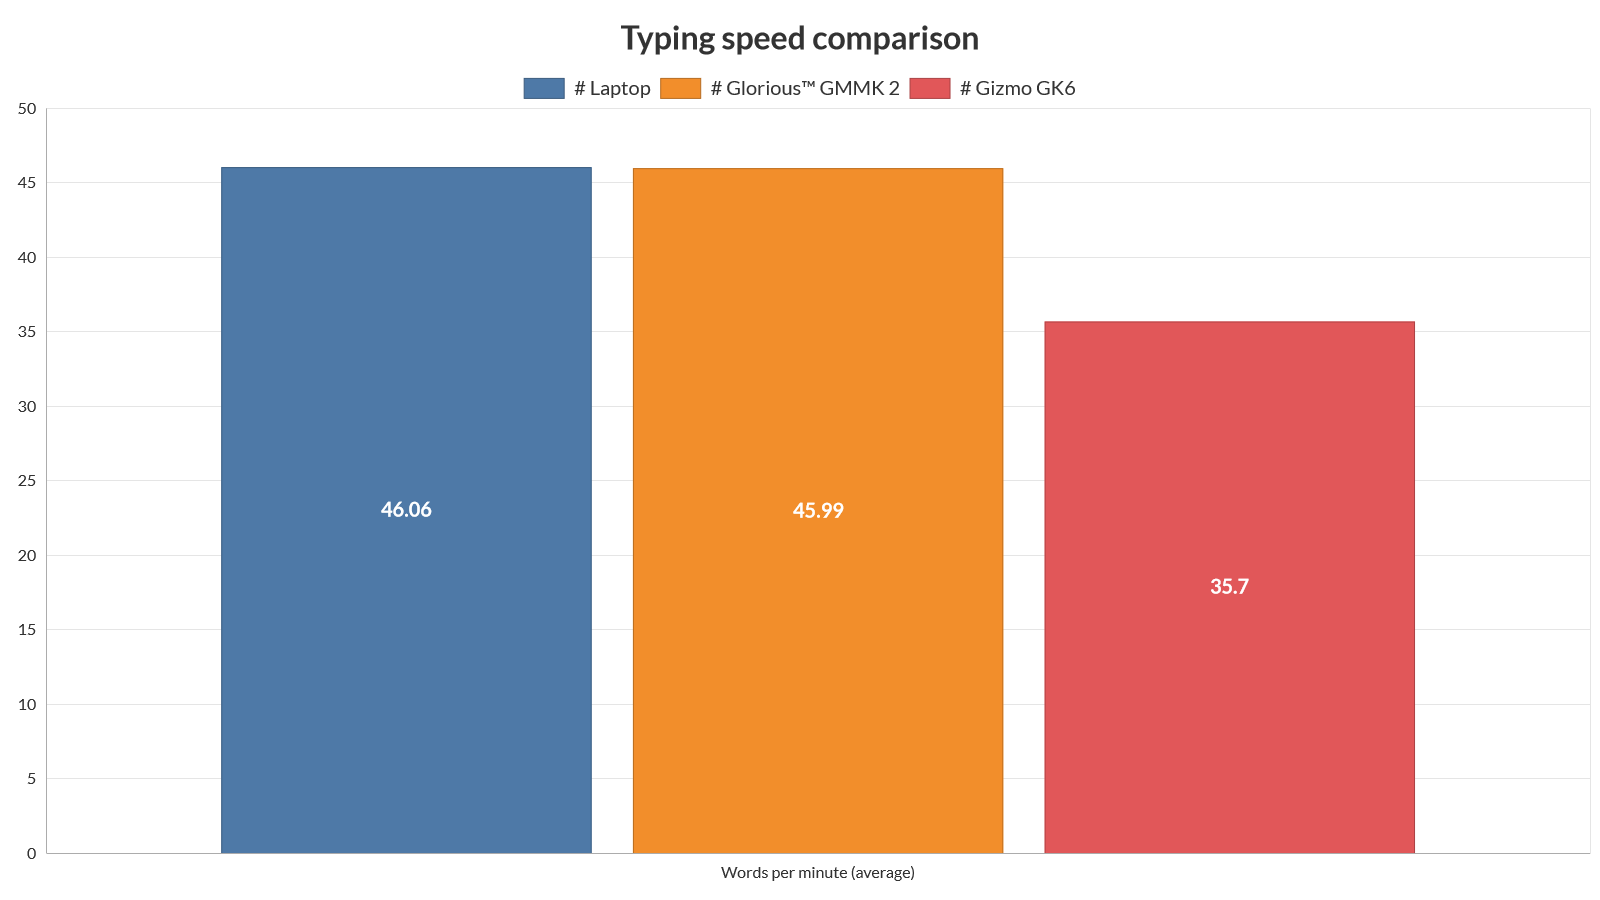 Typing speed comparison (words per minute)